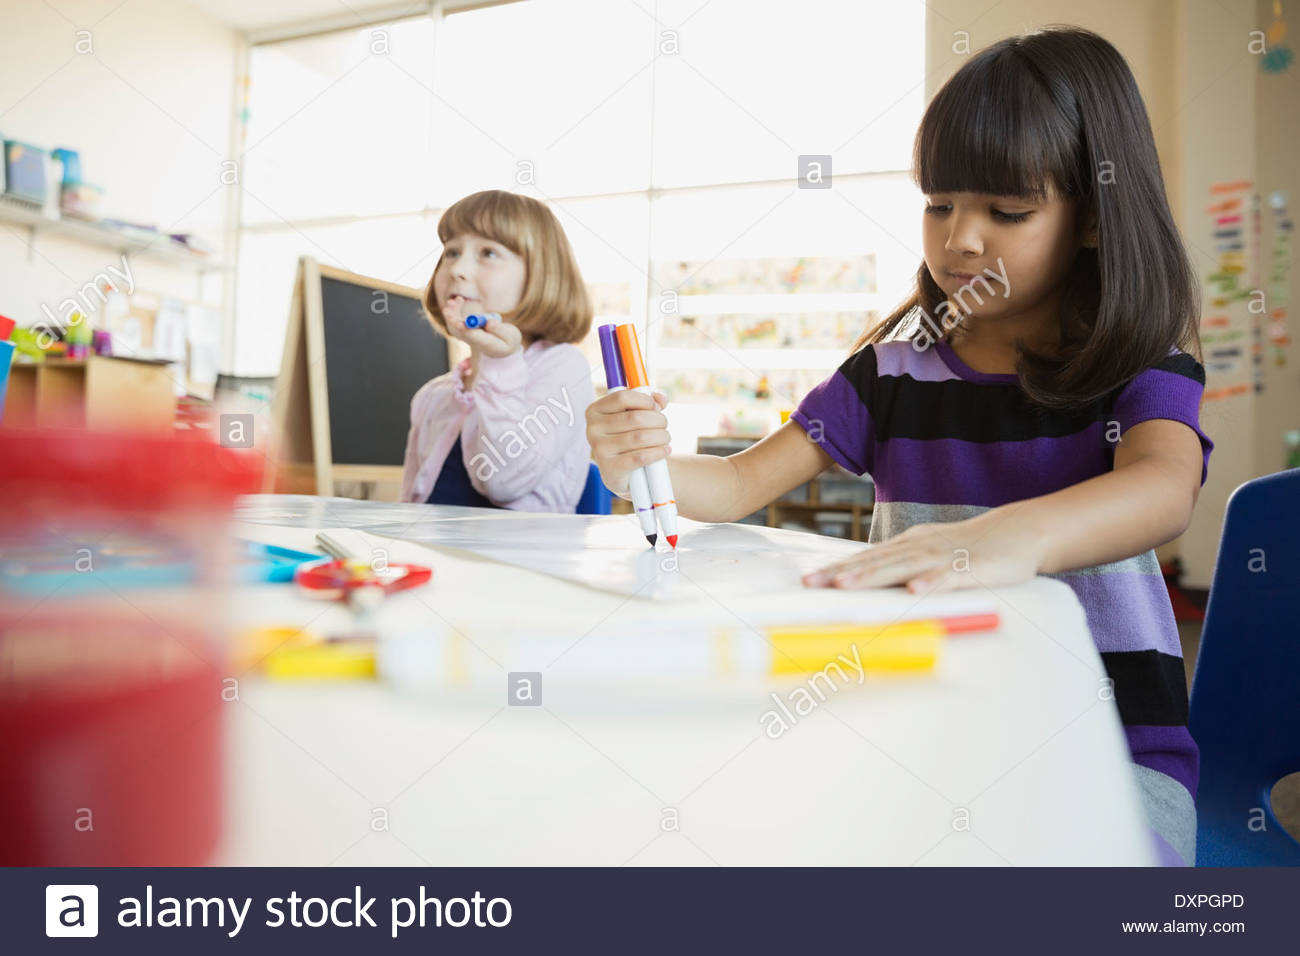 Girls drawing with felt tip pens in art class Stock Photo